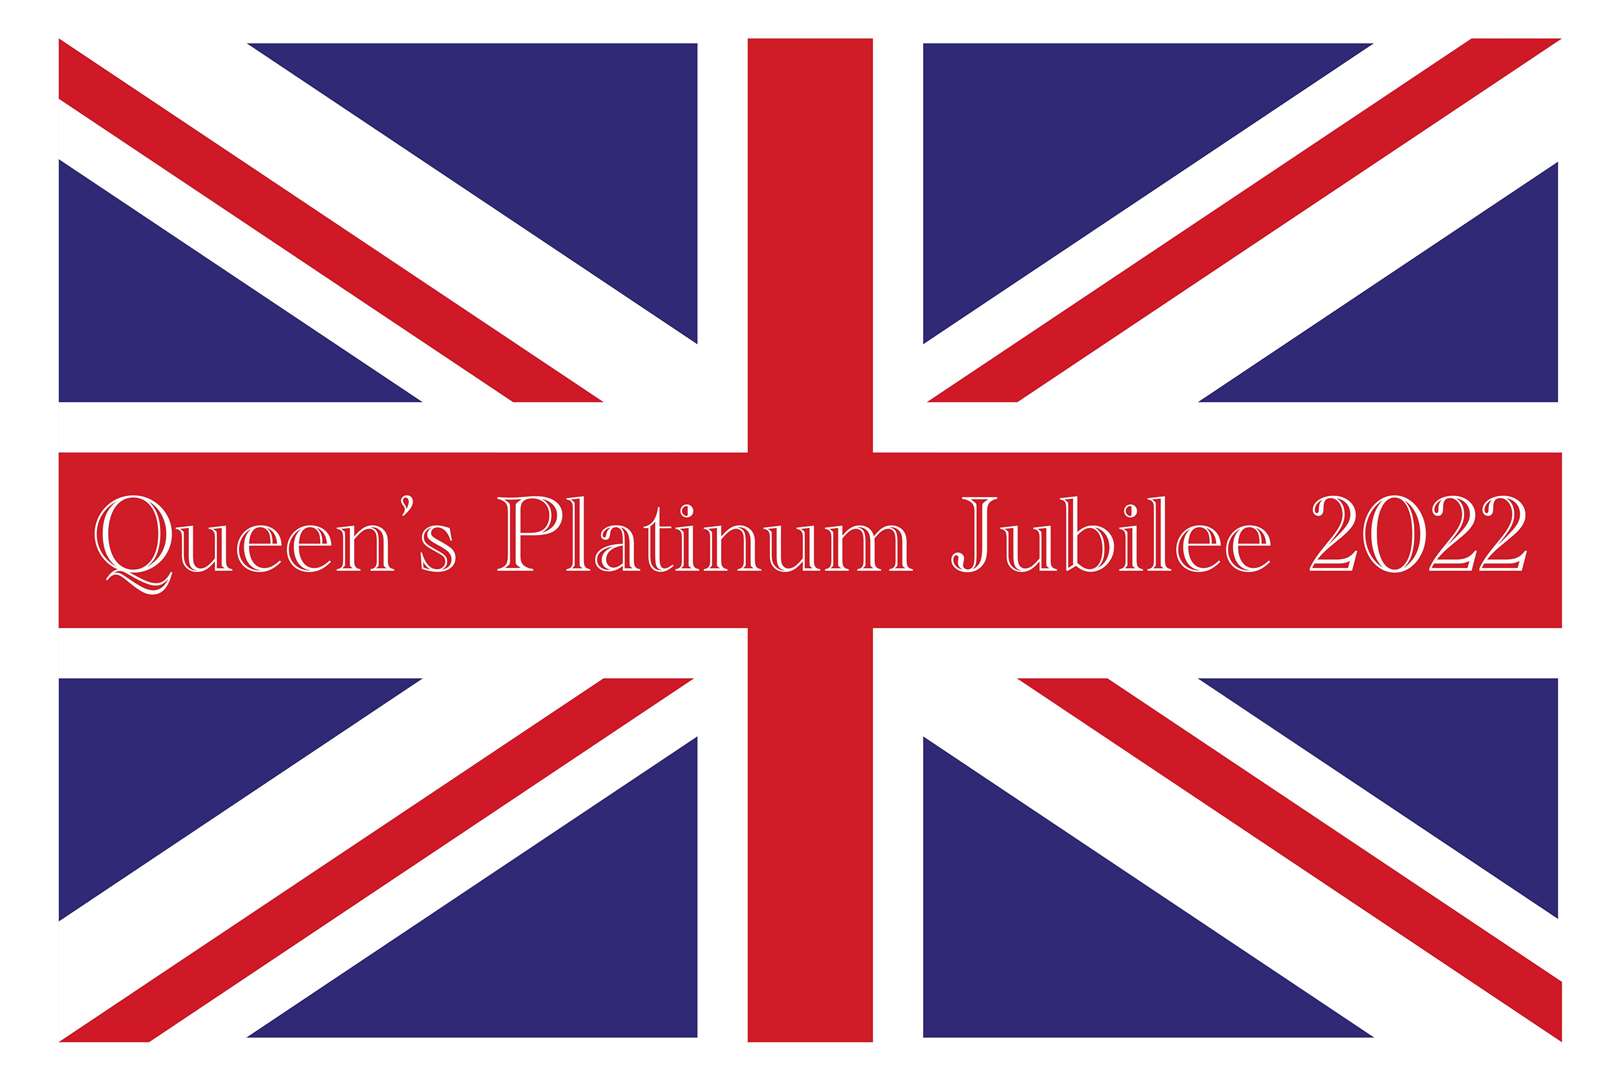 Platinum Jubilee celebrations are being held across the UK from Thursday to Sunday, June 2-5.